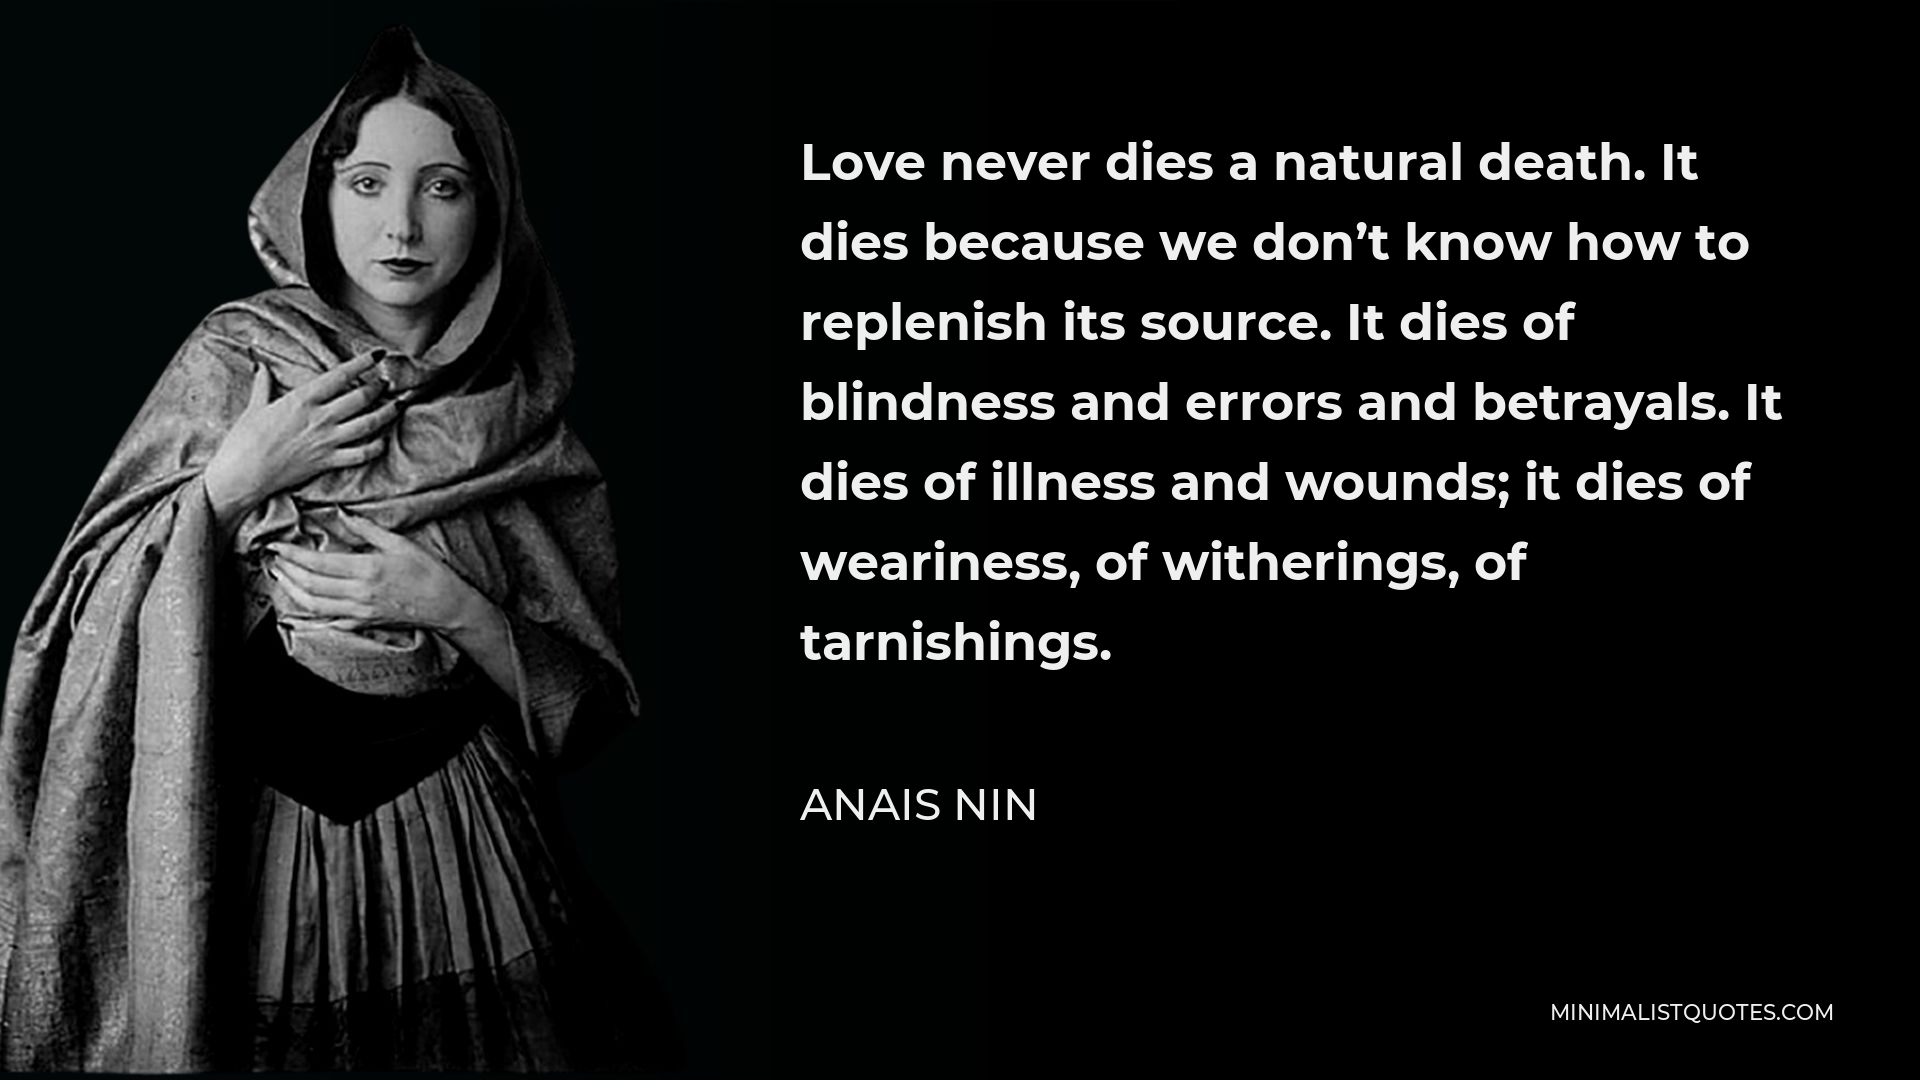 Anais Nin Quote - Love never dies a natural death. It dies because we don’t know how to replenish its source. It dies of blindness and errors and betrayals. It dies of illness and wounds; it dies of weariness, of witherings, of tarnishings.